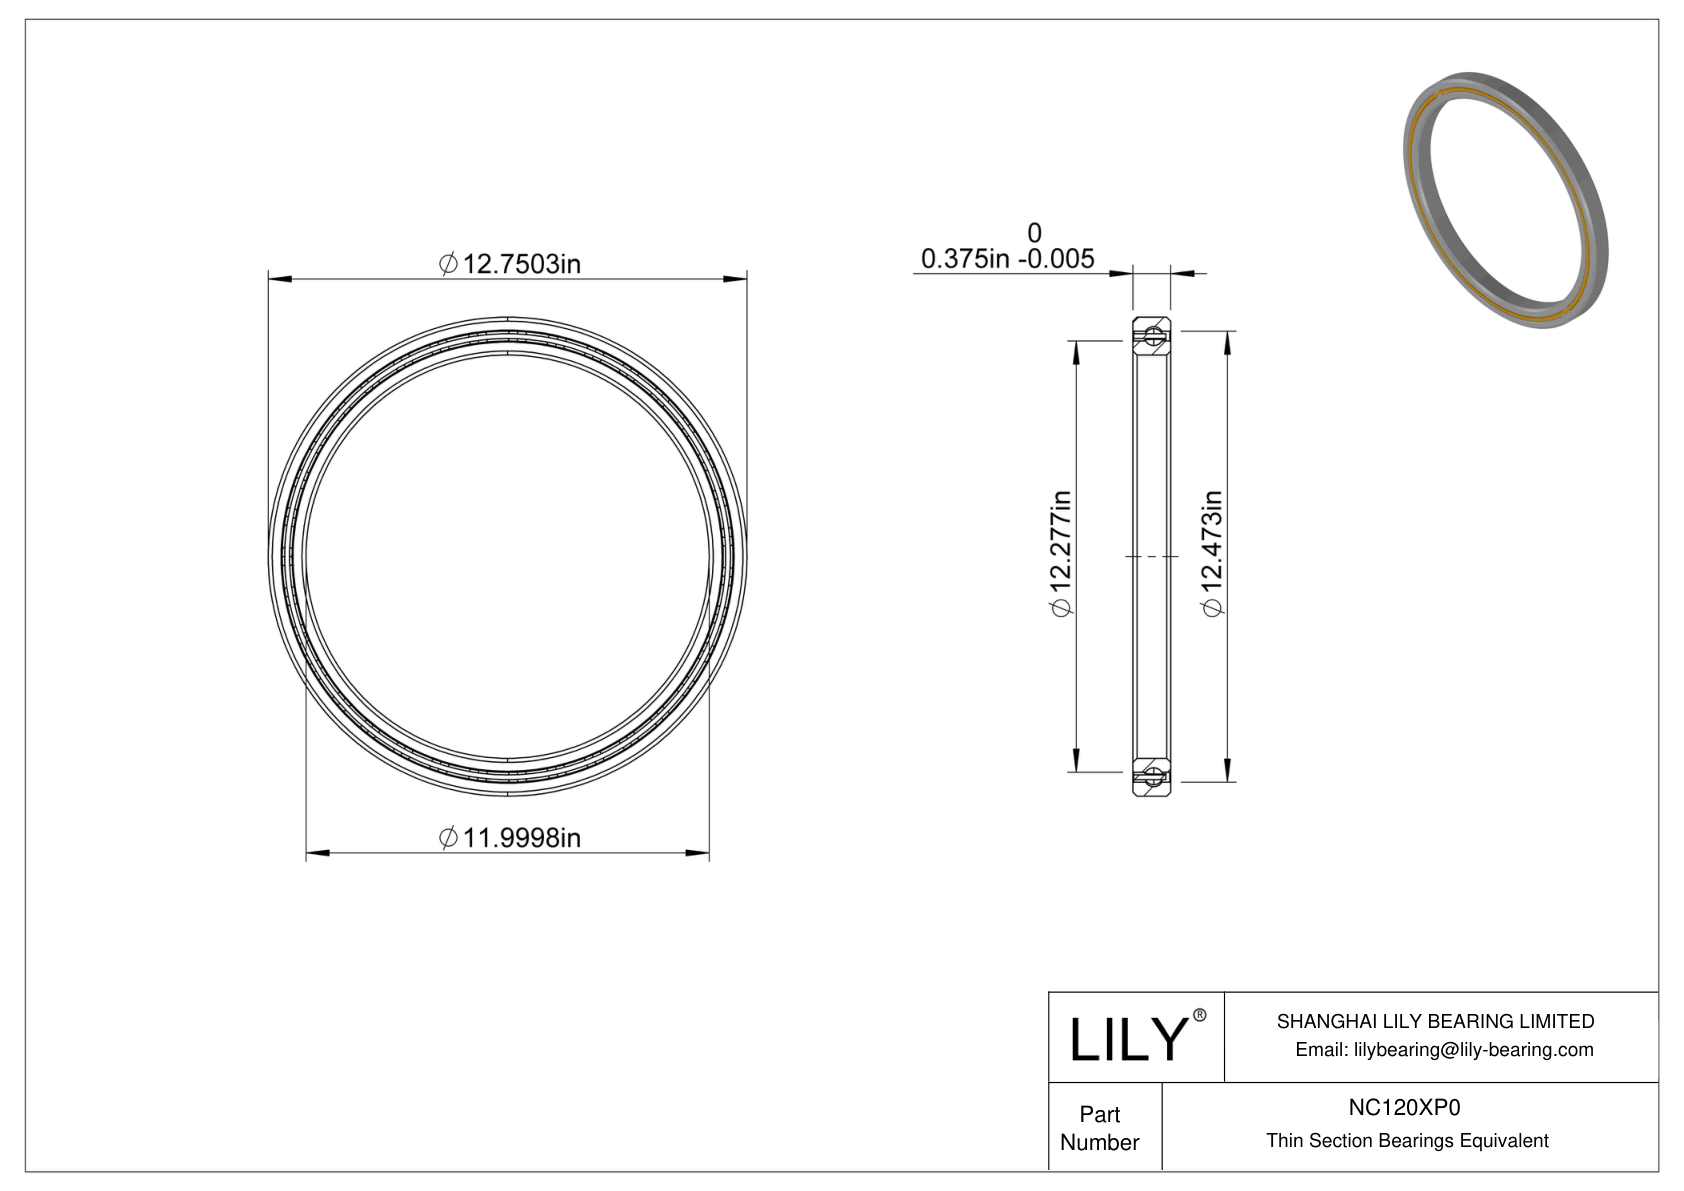 NC120XP0 Constant Section (CS) Bearings cad drawing